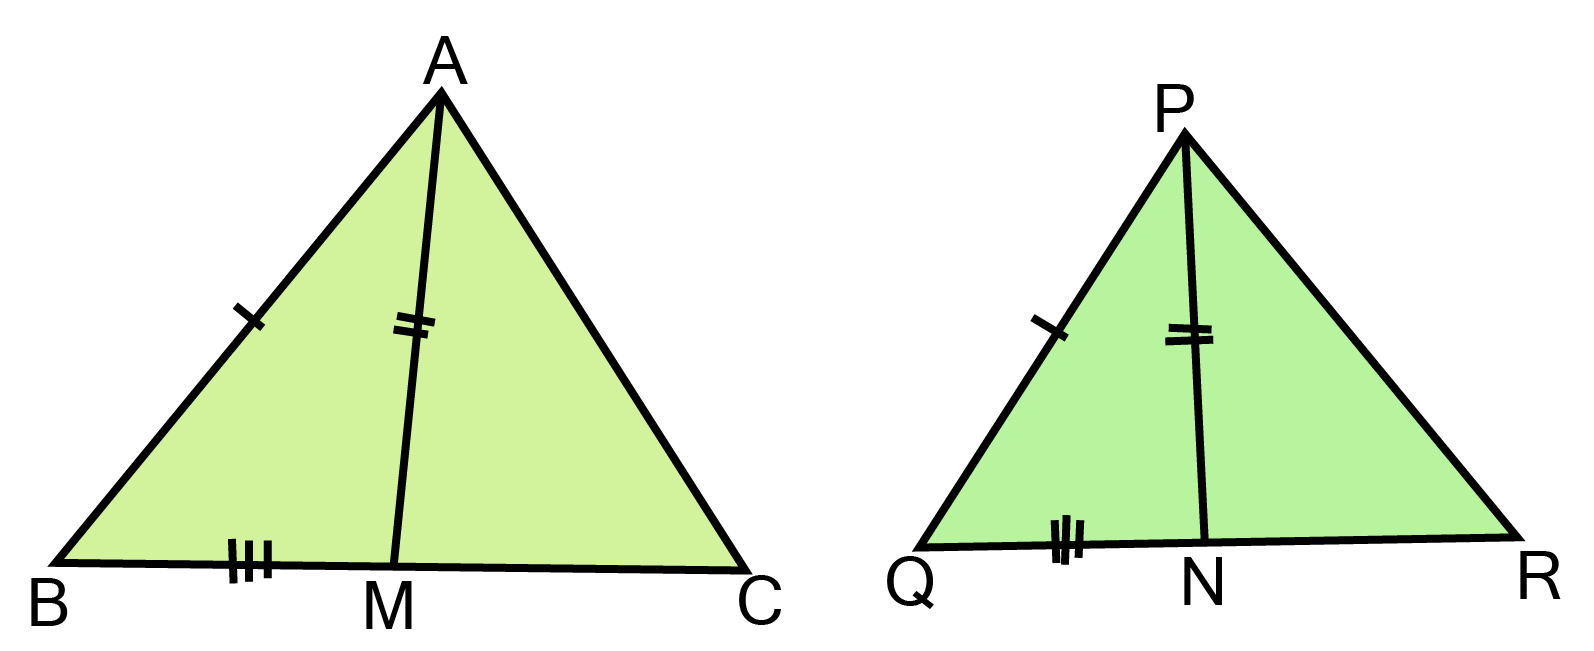 $\vartriangle {\text{ABC and }}\vartriangle {\text{DBC}}$ are two isosceles triangles on the same base BC and vertices A and D are on the same side of BC